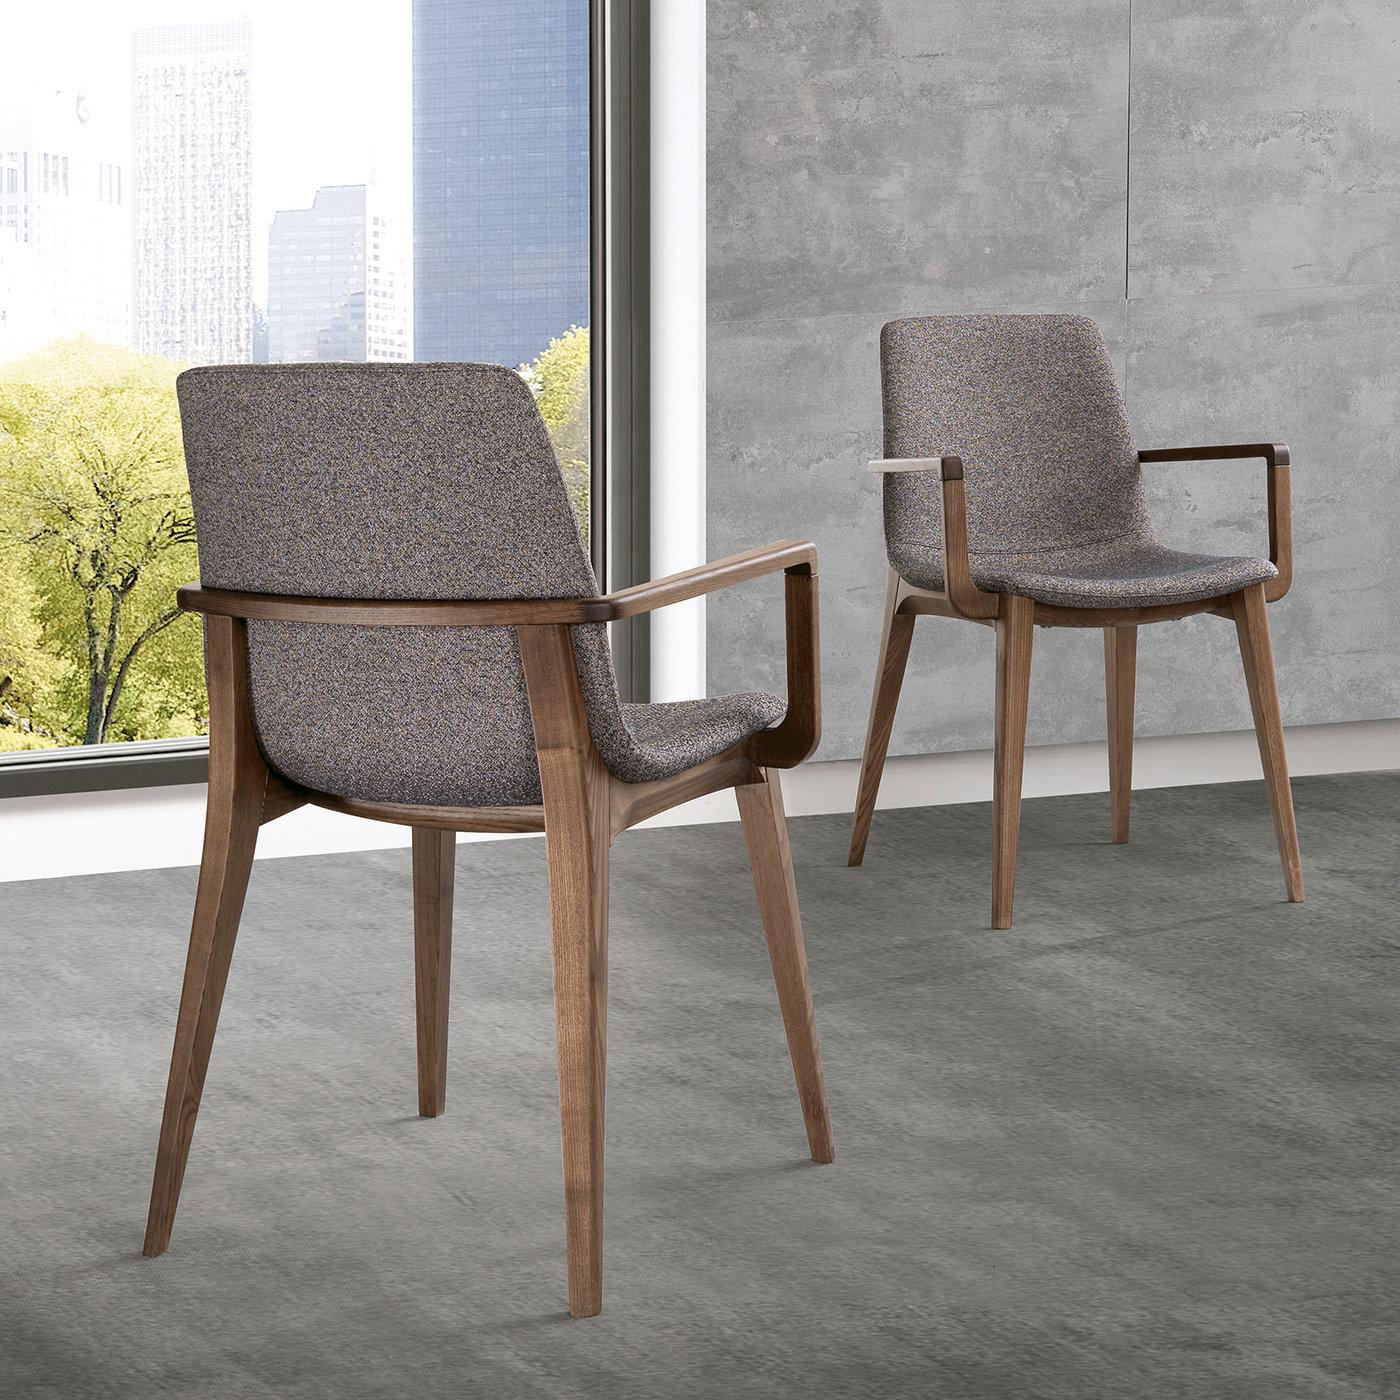 Part of the Ellen collection designed by the internal studio of designers of Pacini & Cappellini, this sophisticated chair will be an ideal complement to a modern dining room. Its simple frame in ash with a warm walnut stain is inspired by